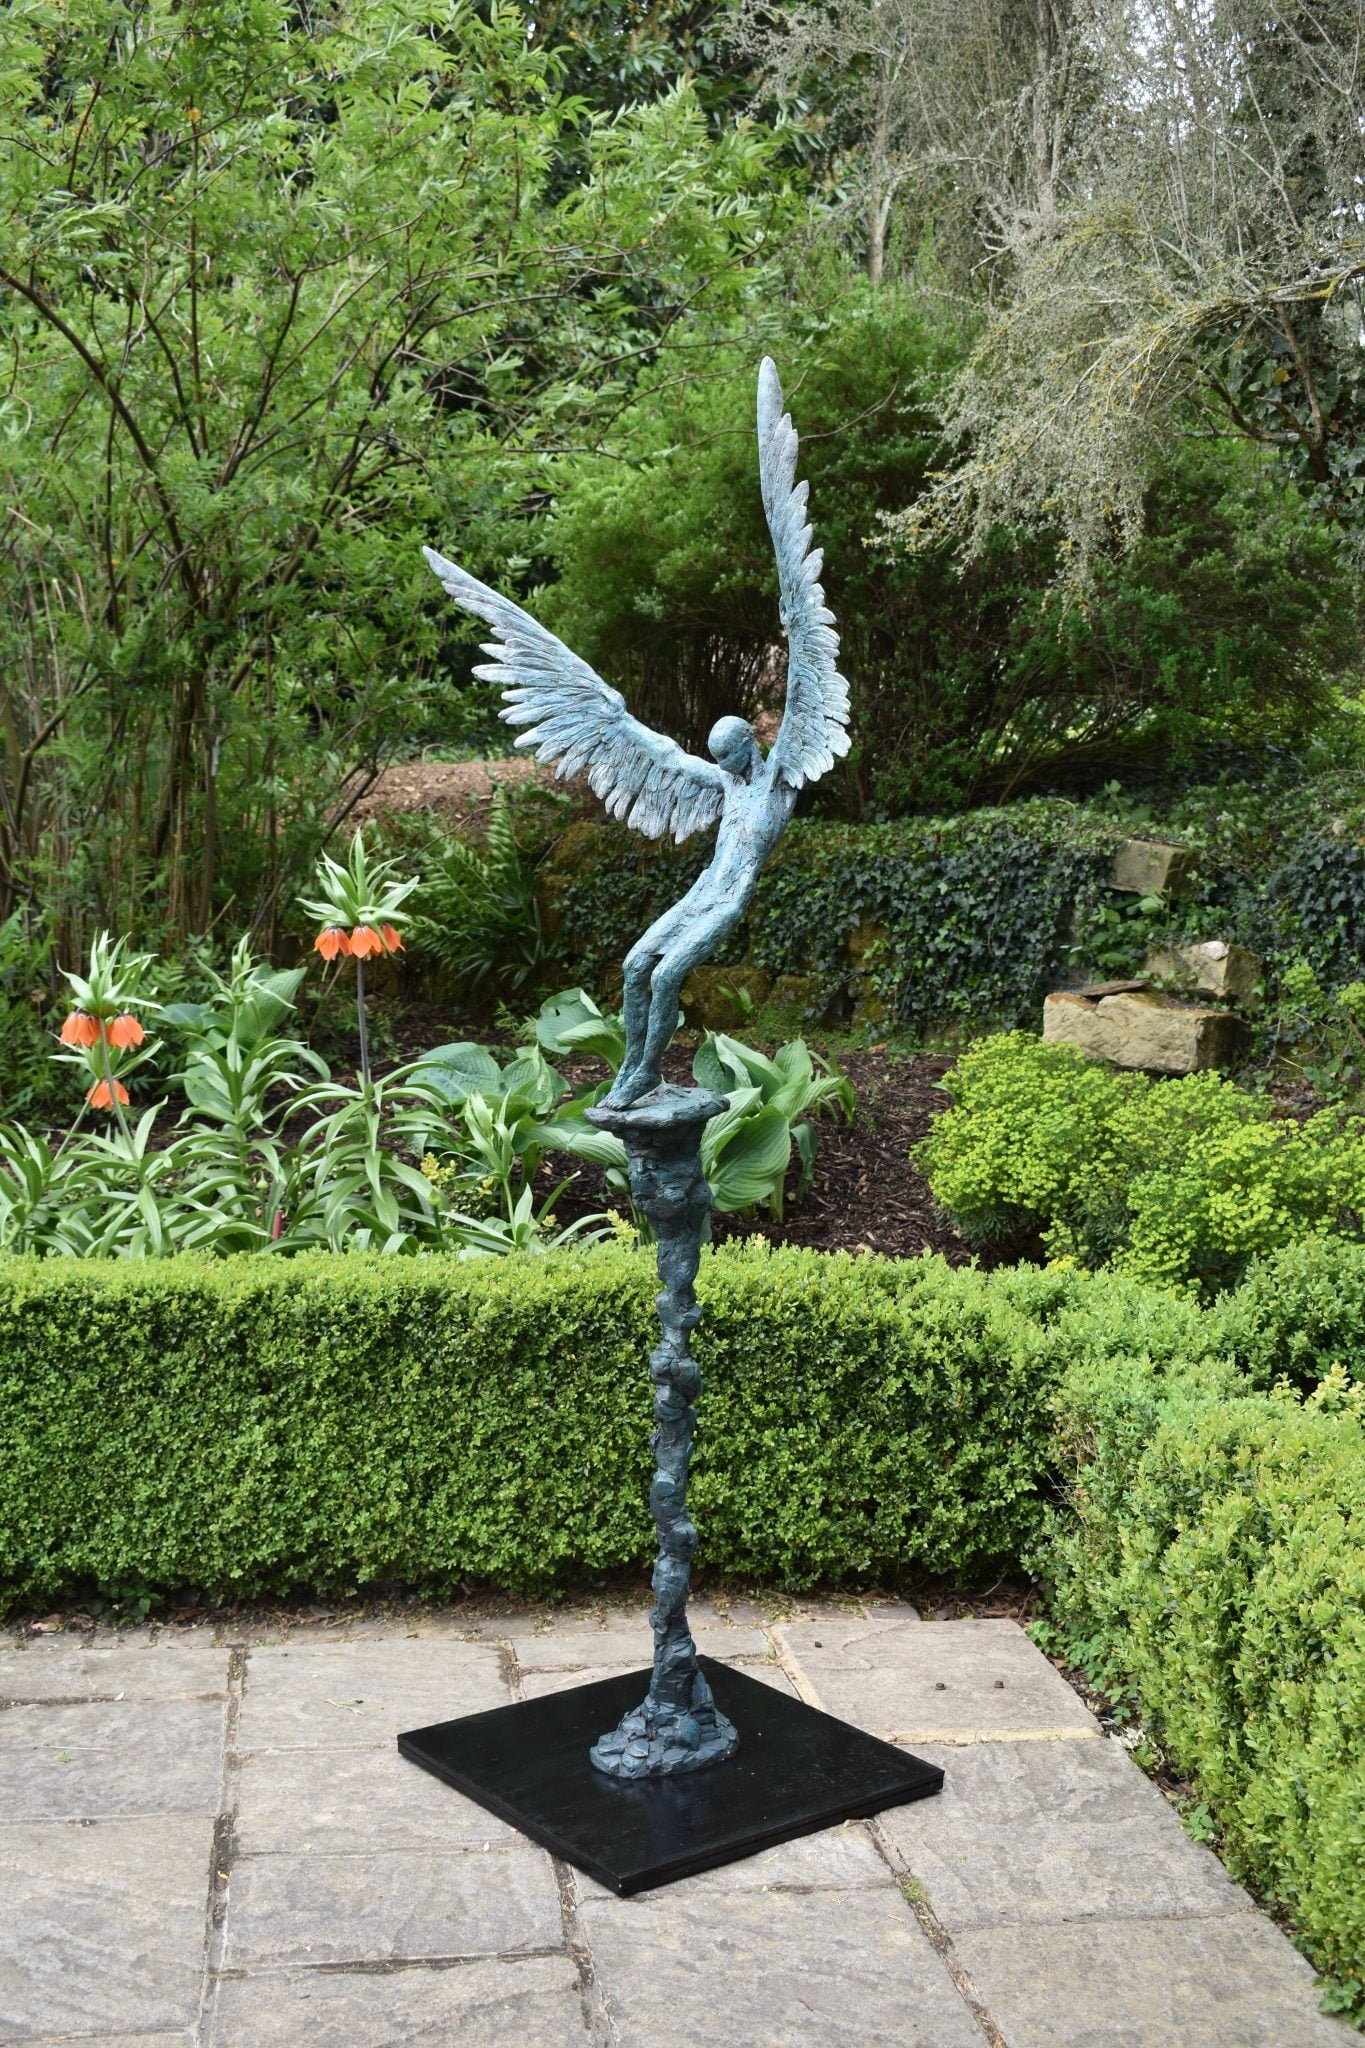 Sculpture in bronze of the mythological figure of Icarus falling from the sky, standing in a courtyard